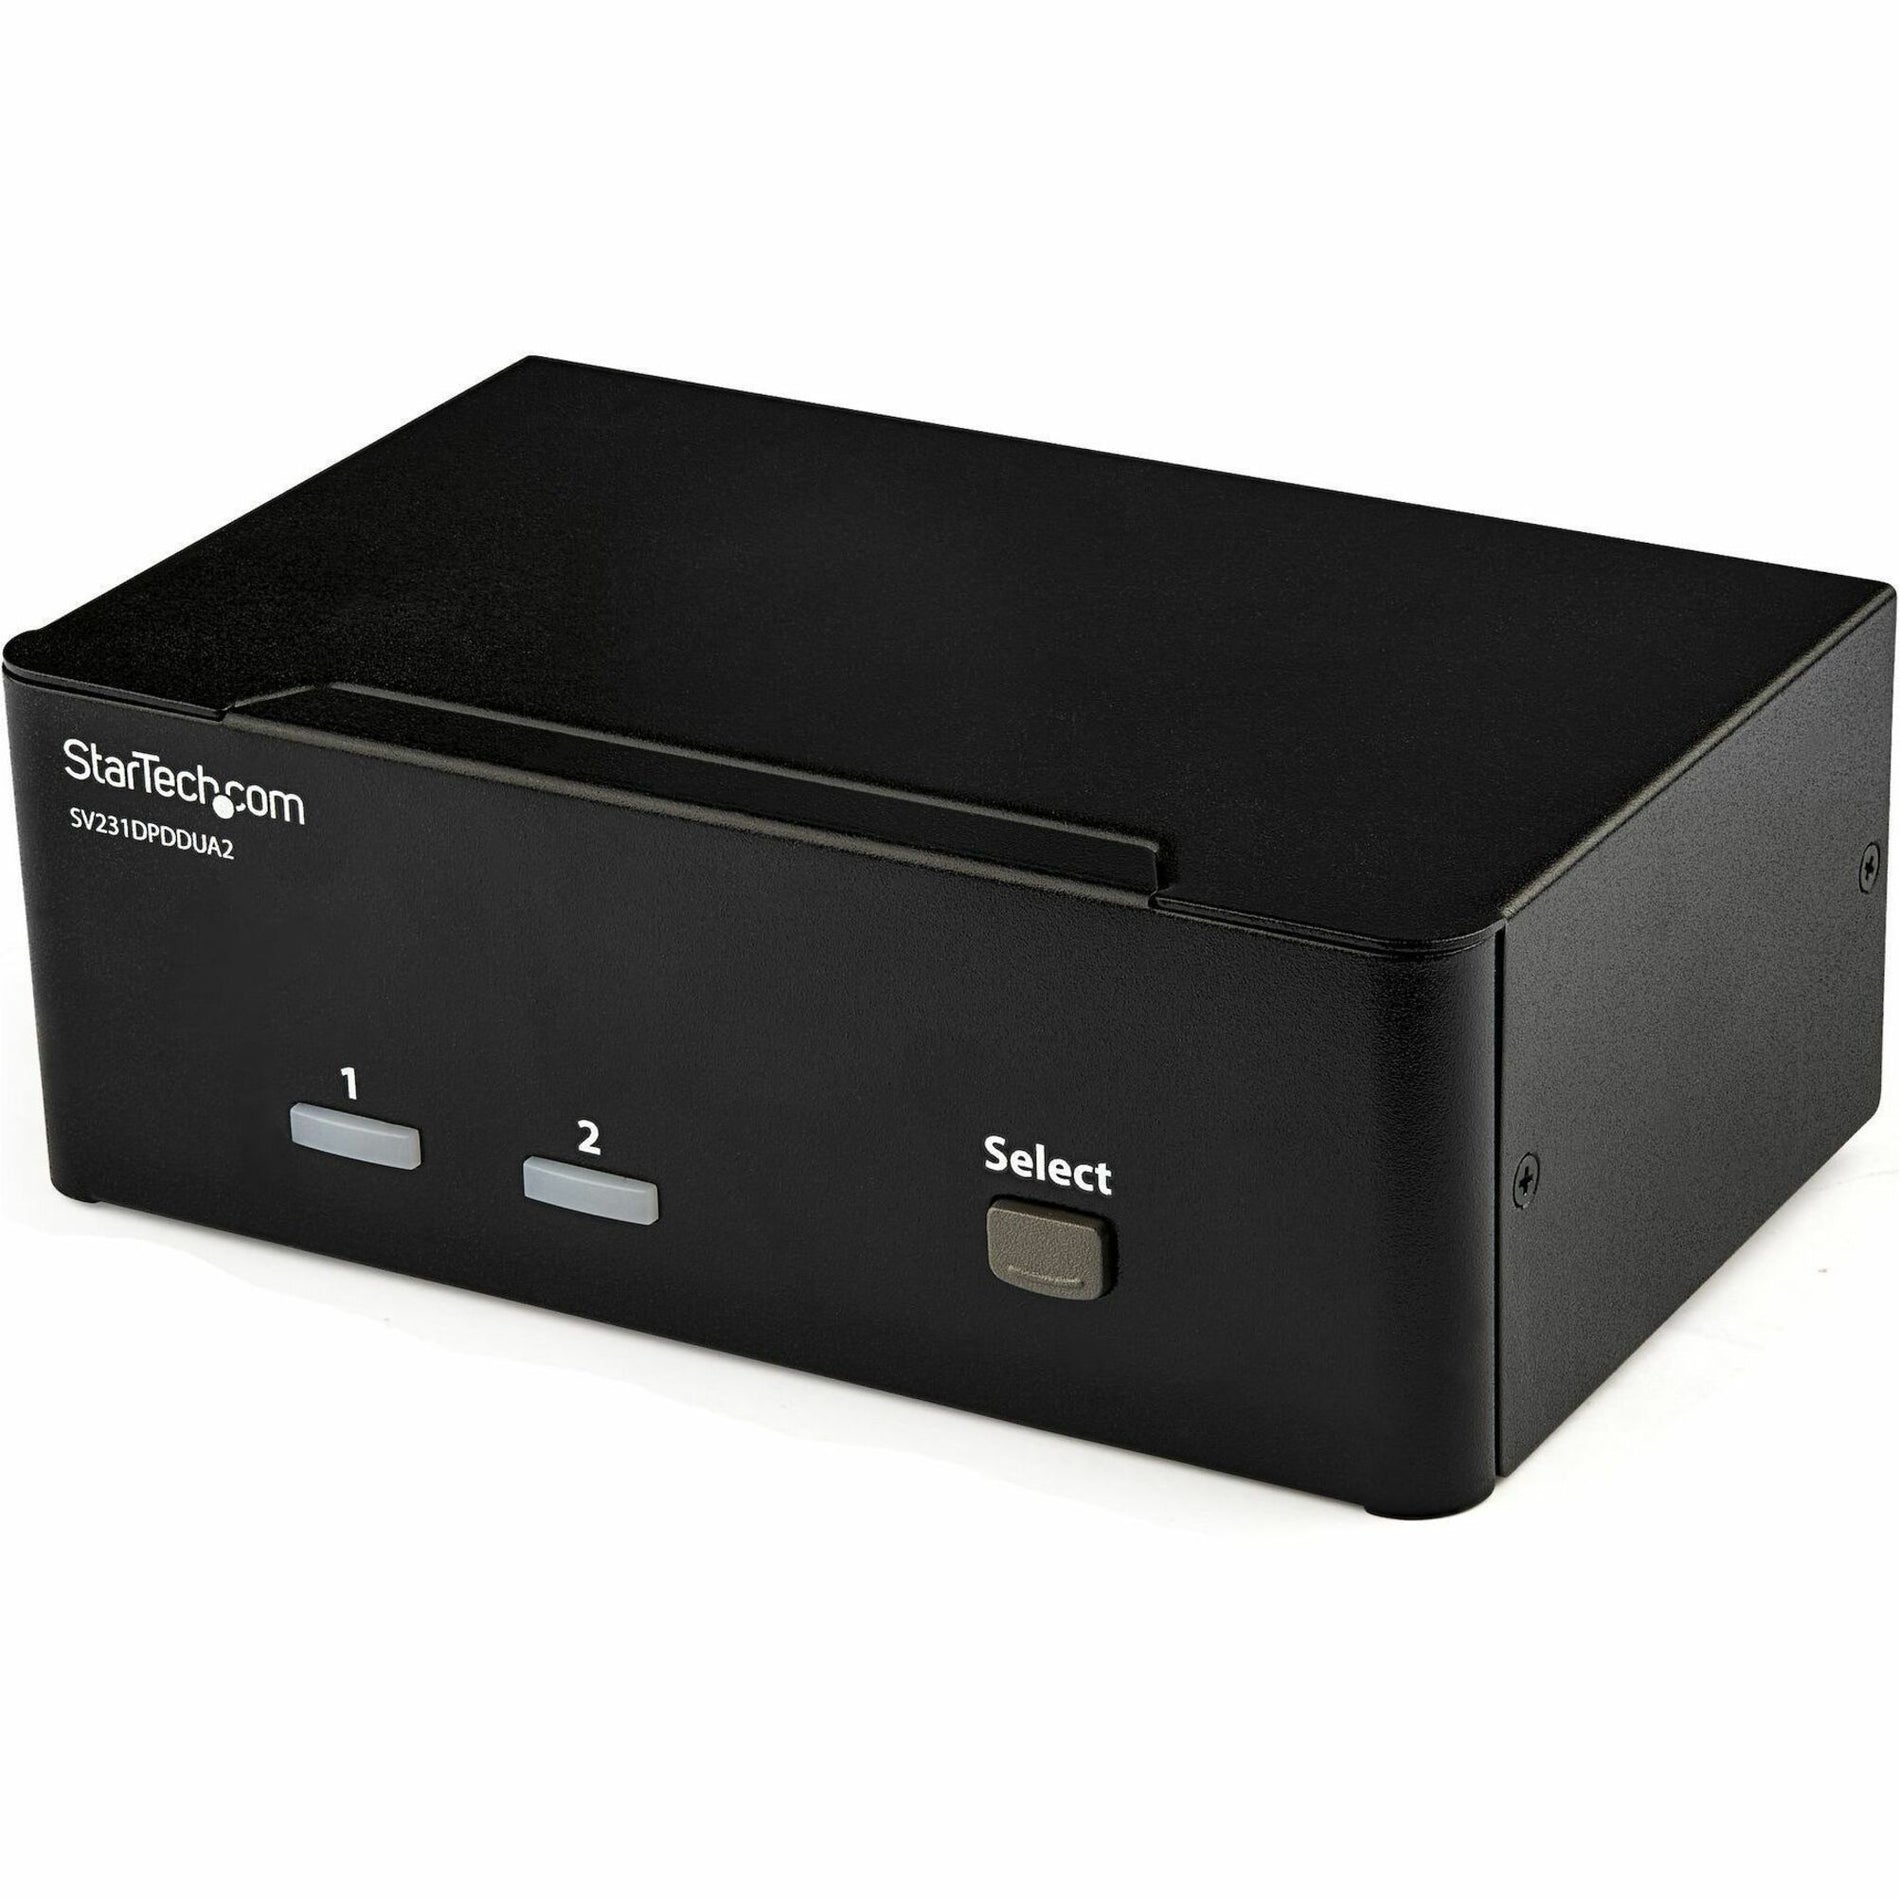 StarTech.com SV231DPDDUA2 2-Port DisplayPort Dual-Monitor KVM Switch - 4K 60Hz, Access two dual-monitor computers and two shared USB peripherals